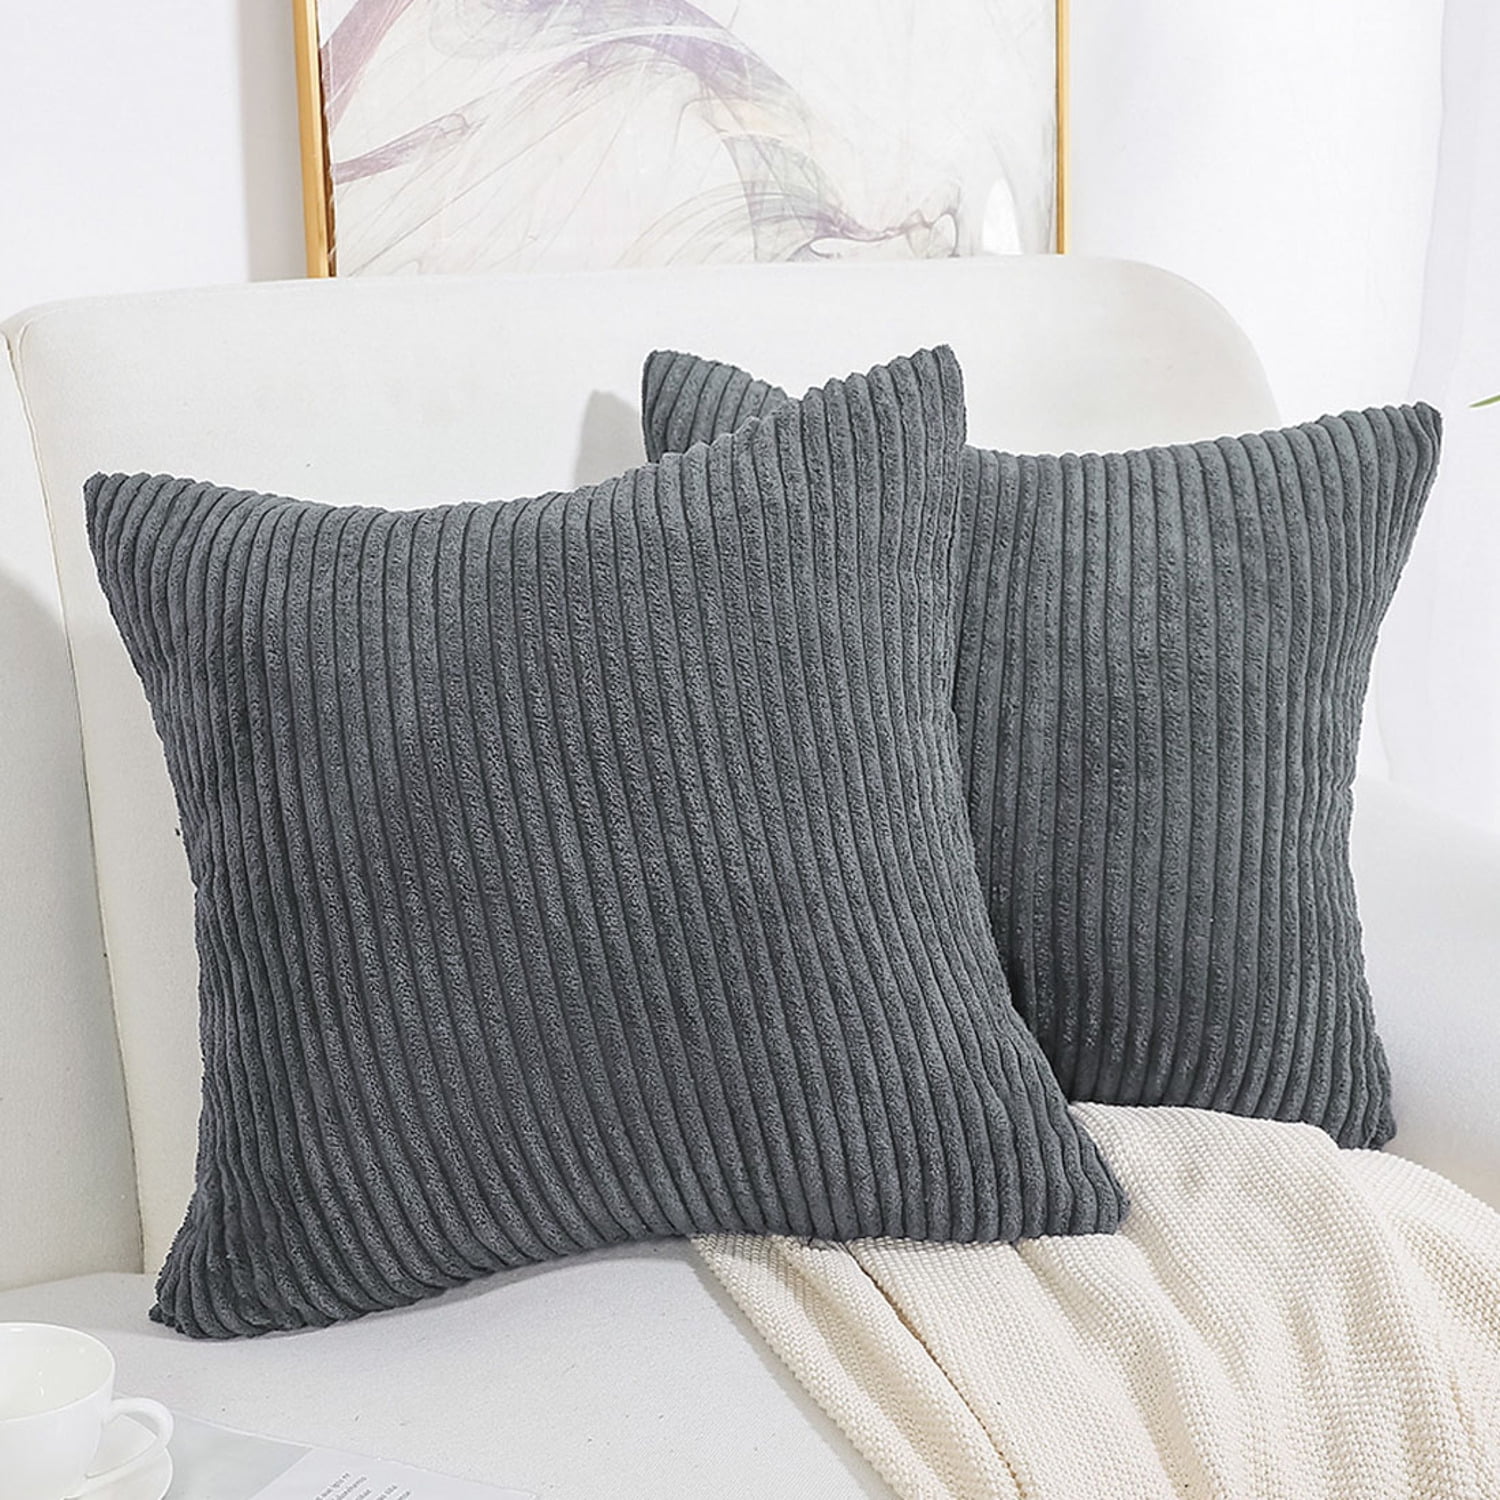 PAIR OF SILVER GREY PLUSH SOFT TOUCH VELVET  18" CUSHION COVERS  £10.95 SET OF 2 